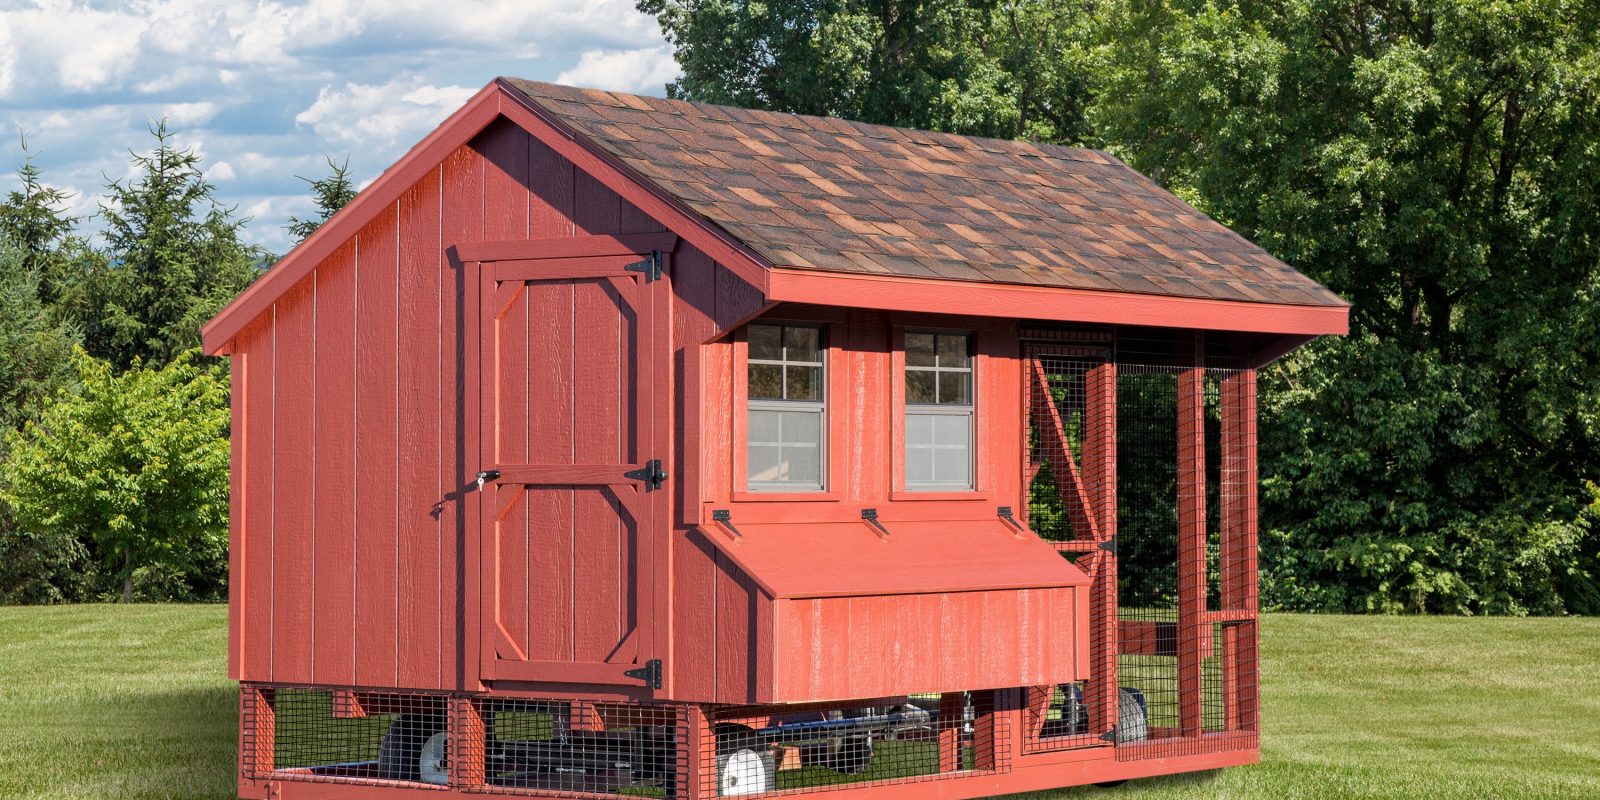 A wooden chicken coop for raising backyard chickens